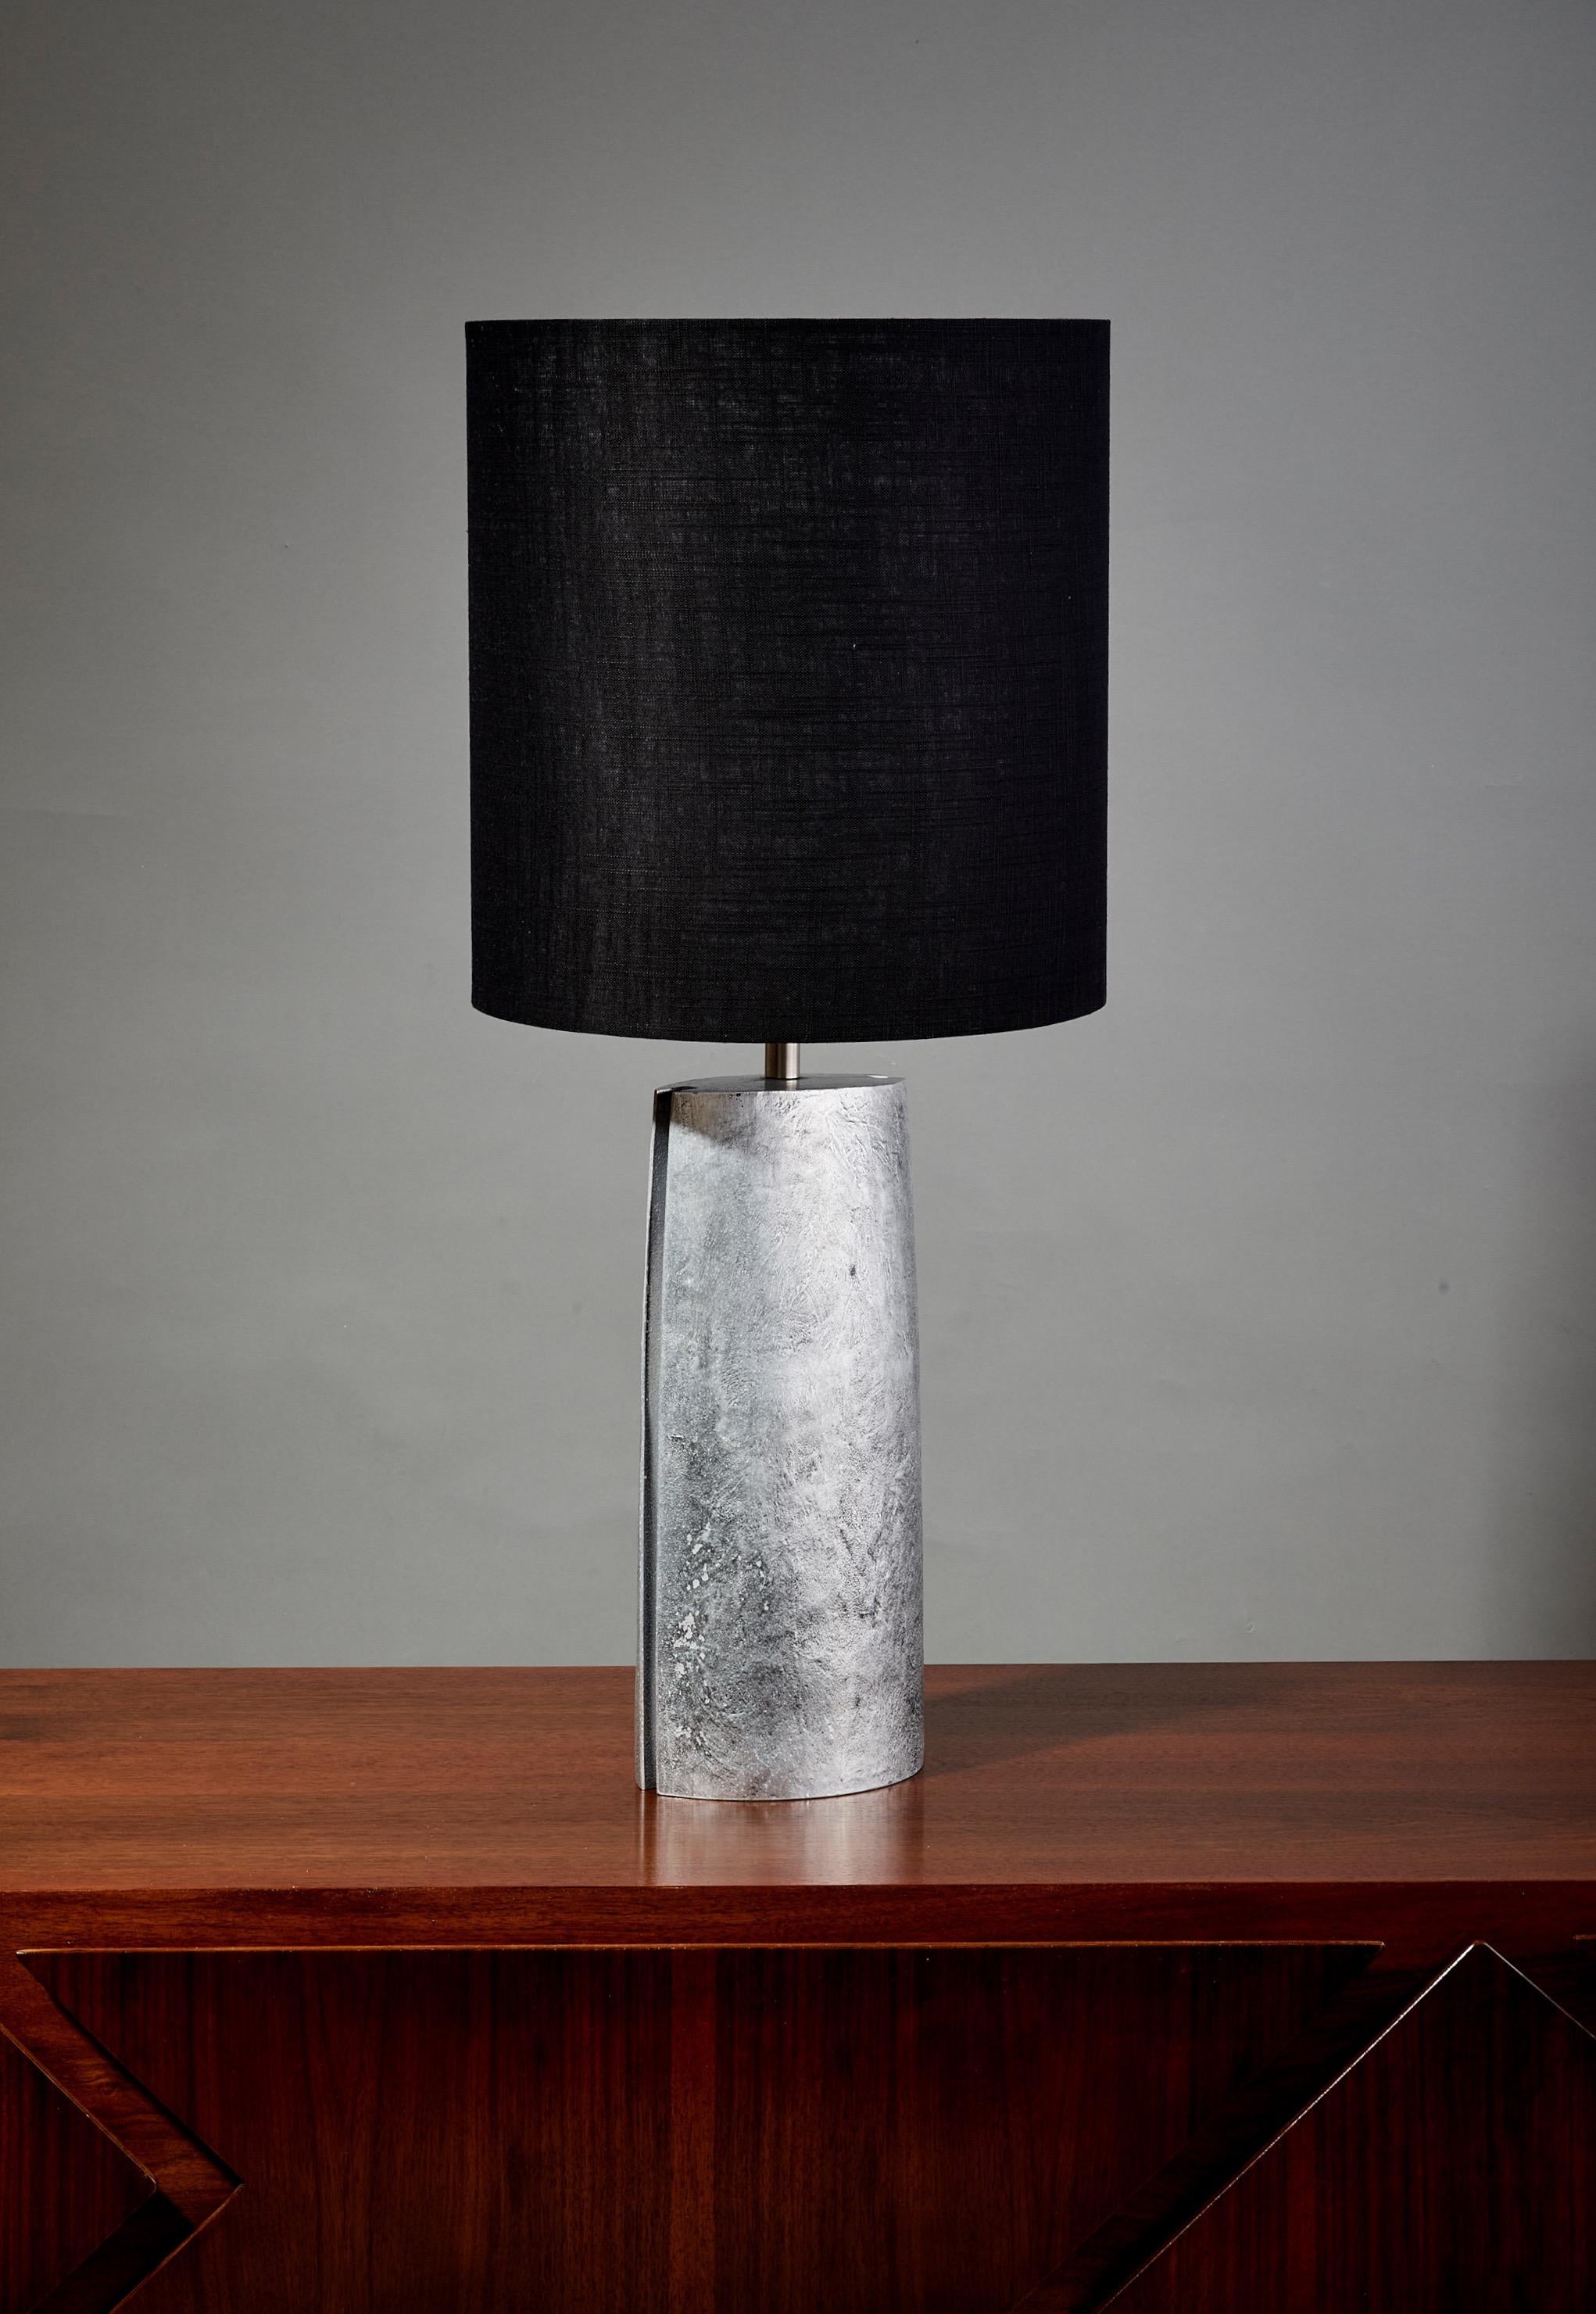 Mid-Century Modern Brutalist Table Lamp in Silver Textured Aluminium with Black Shade, Italy 1970's For Sale